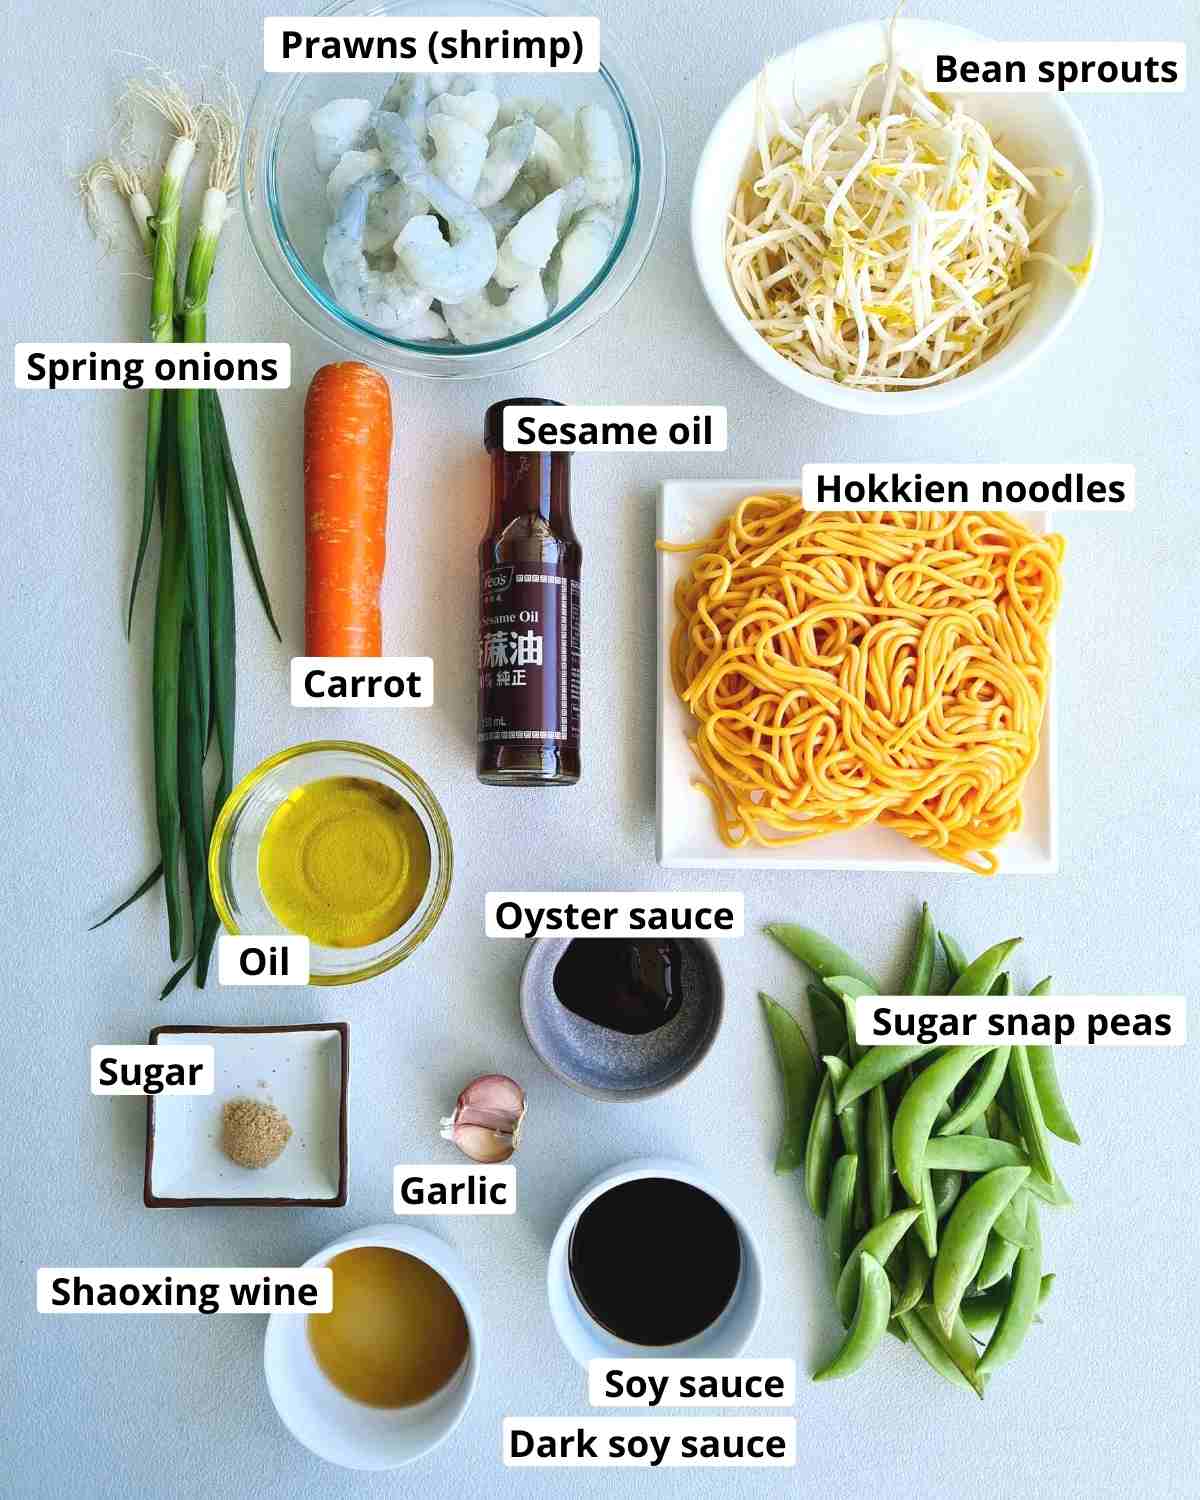 Ingredients required to make a prawn noodle stir fry recipe, labeled